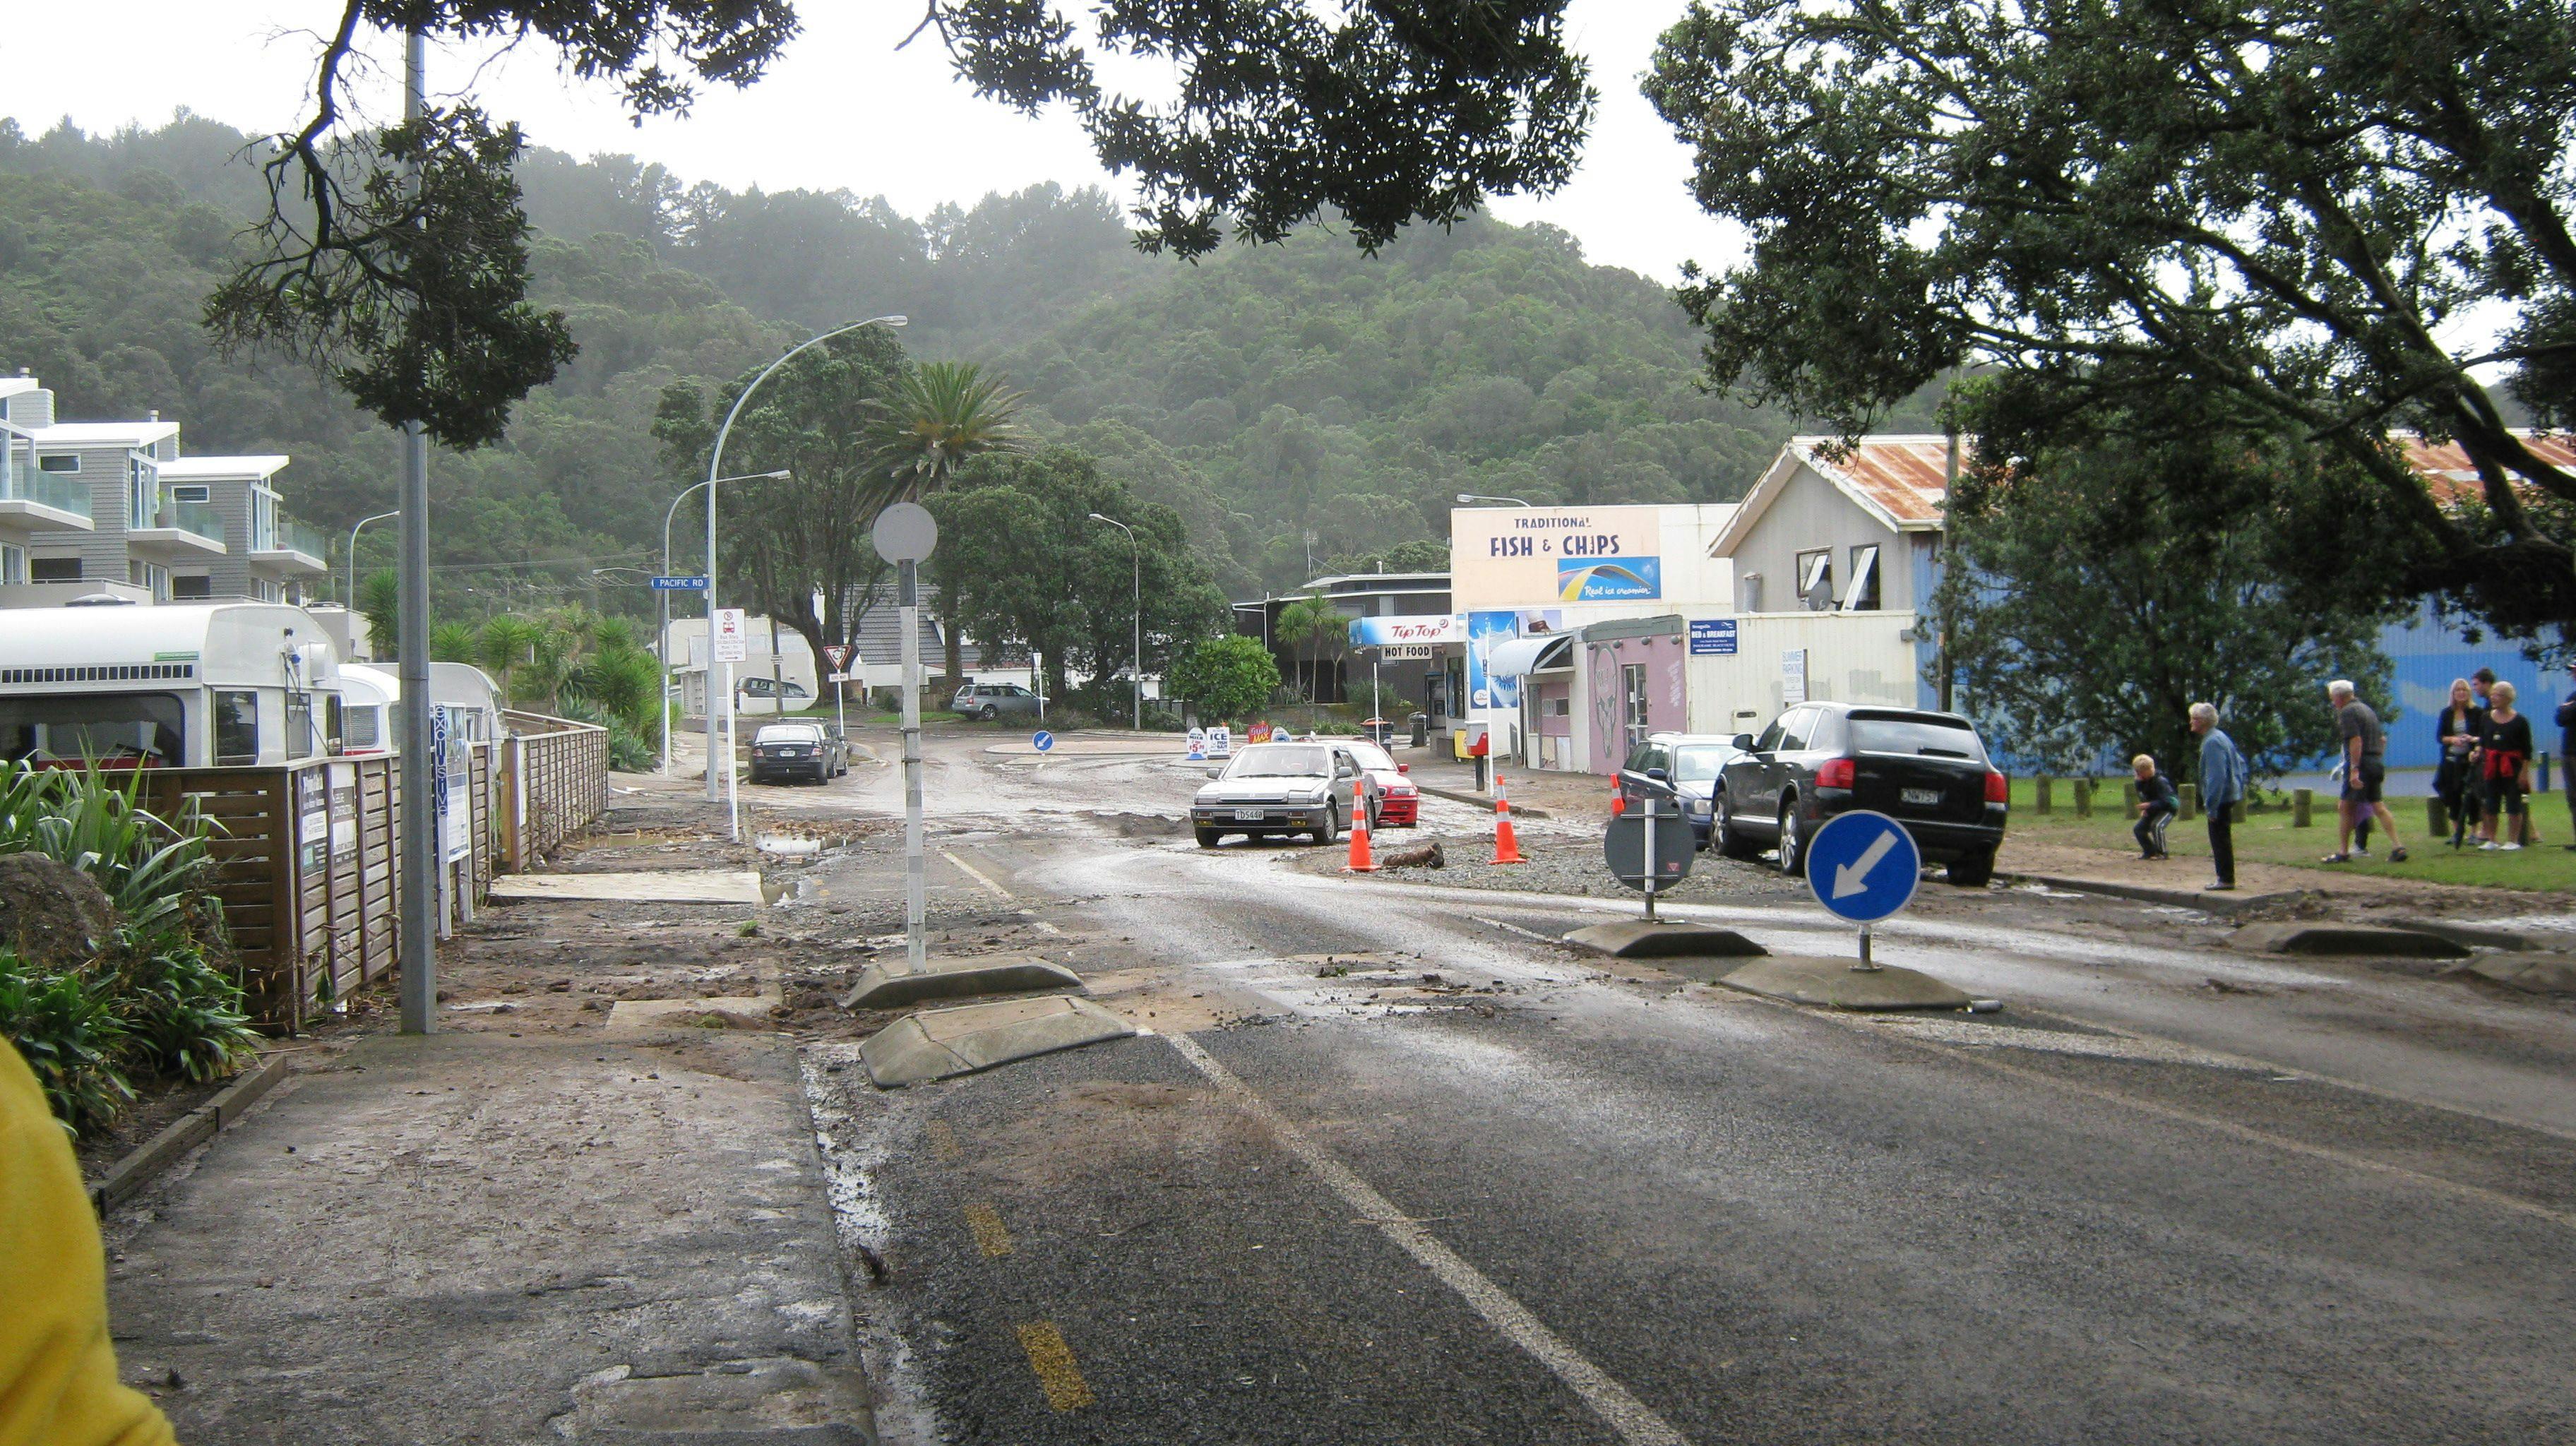 Flooding In The Street